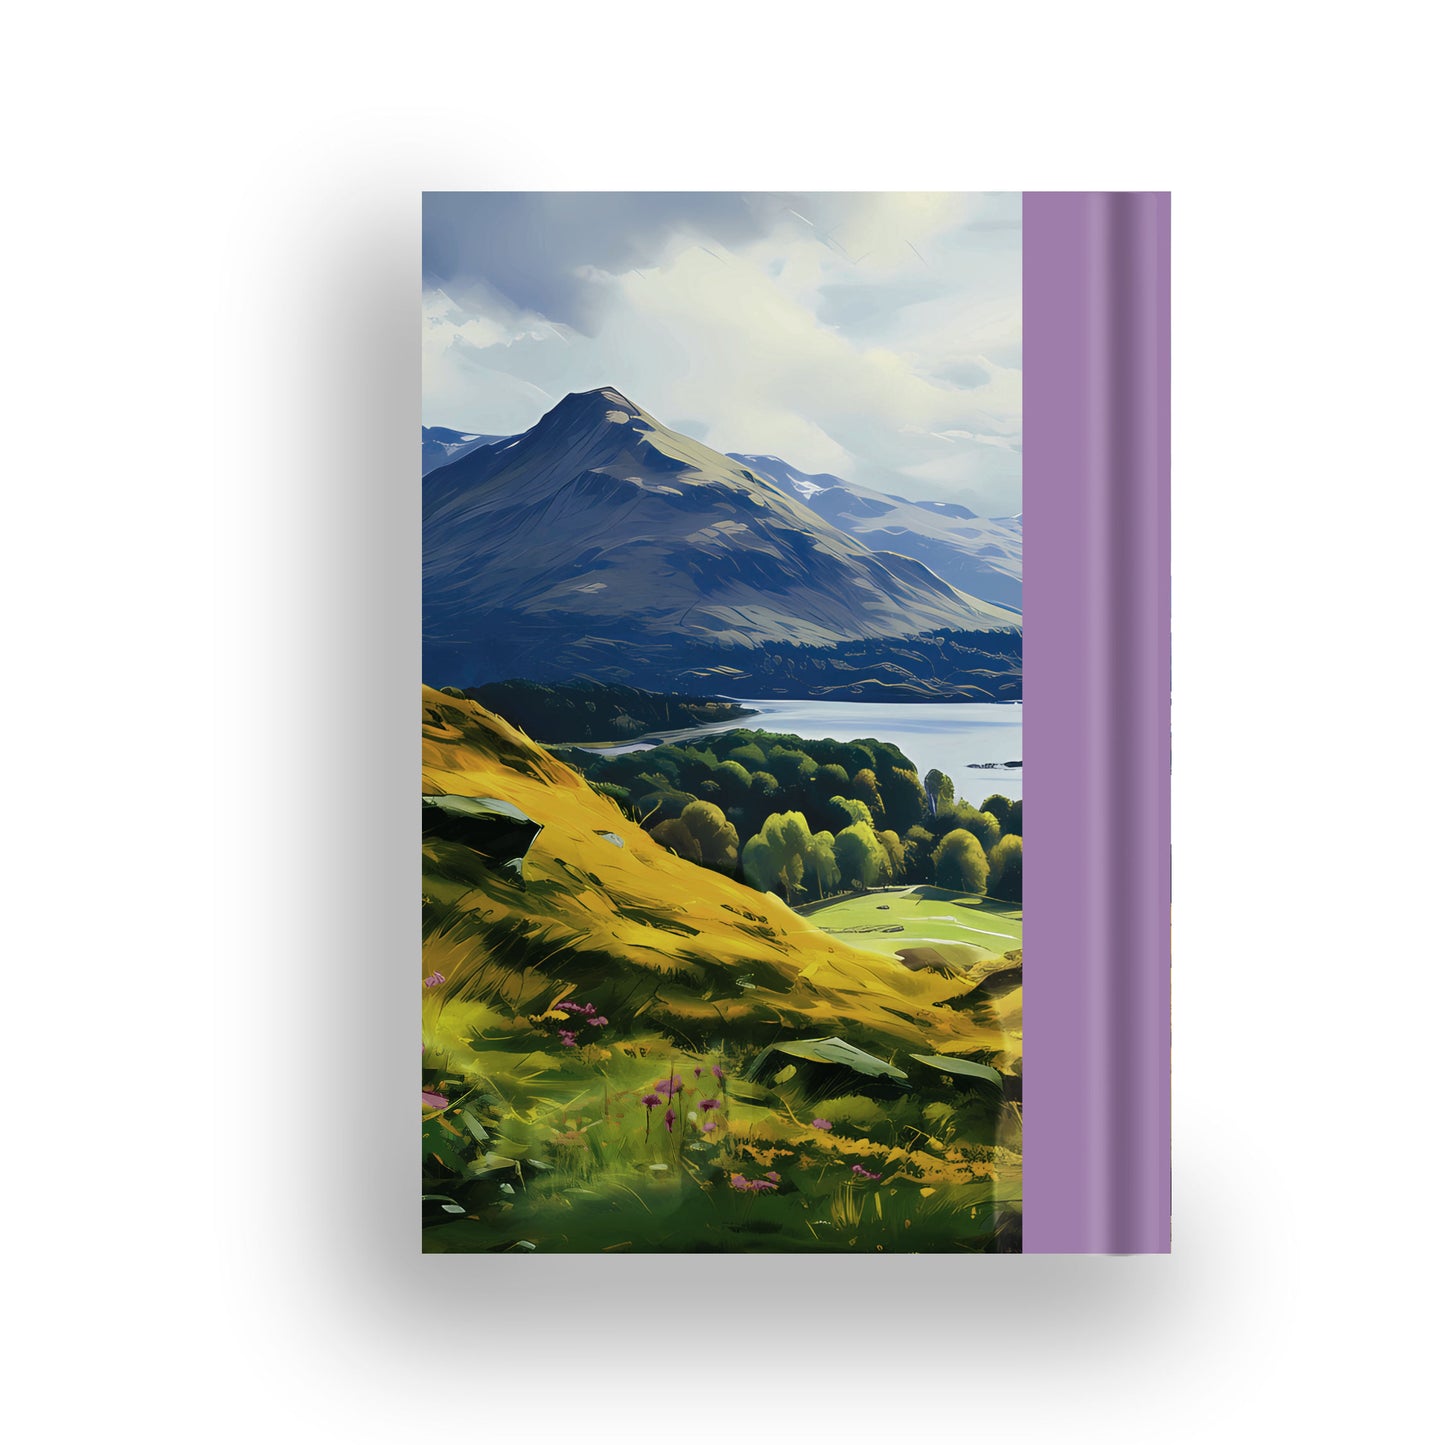 Glens notebook back cover with Irish hills and heather